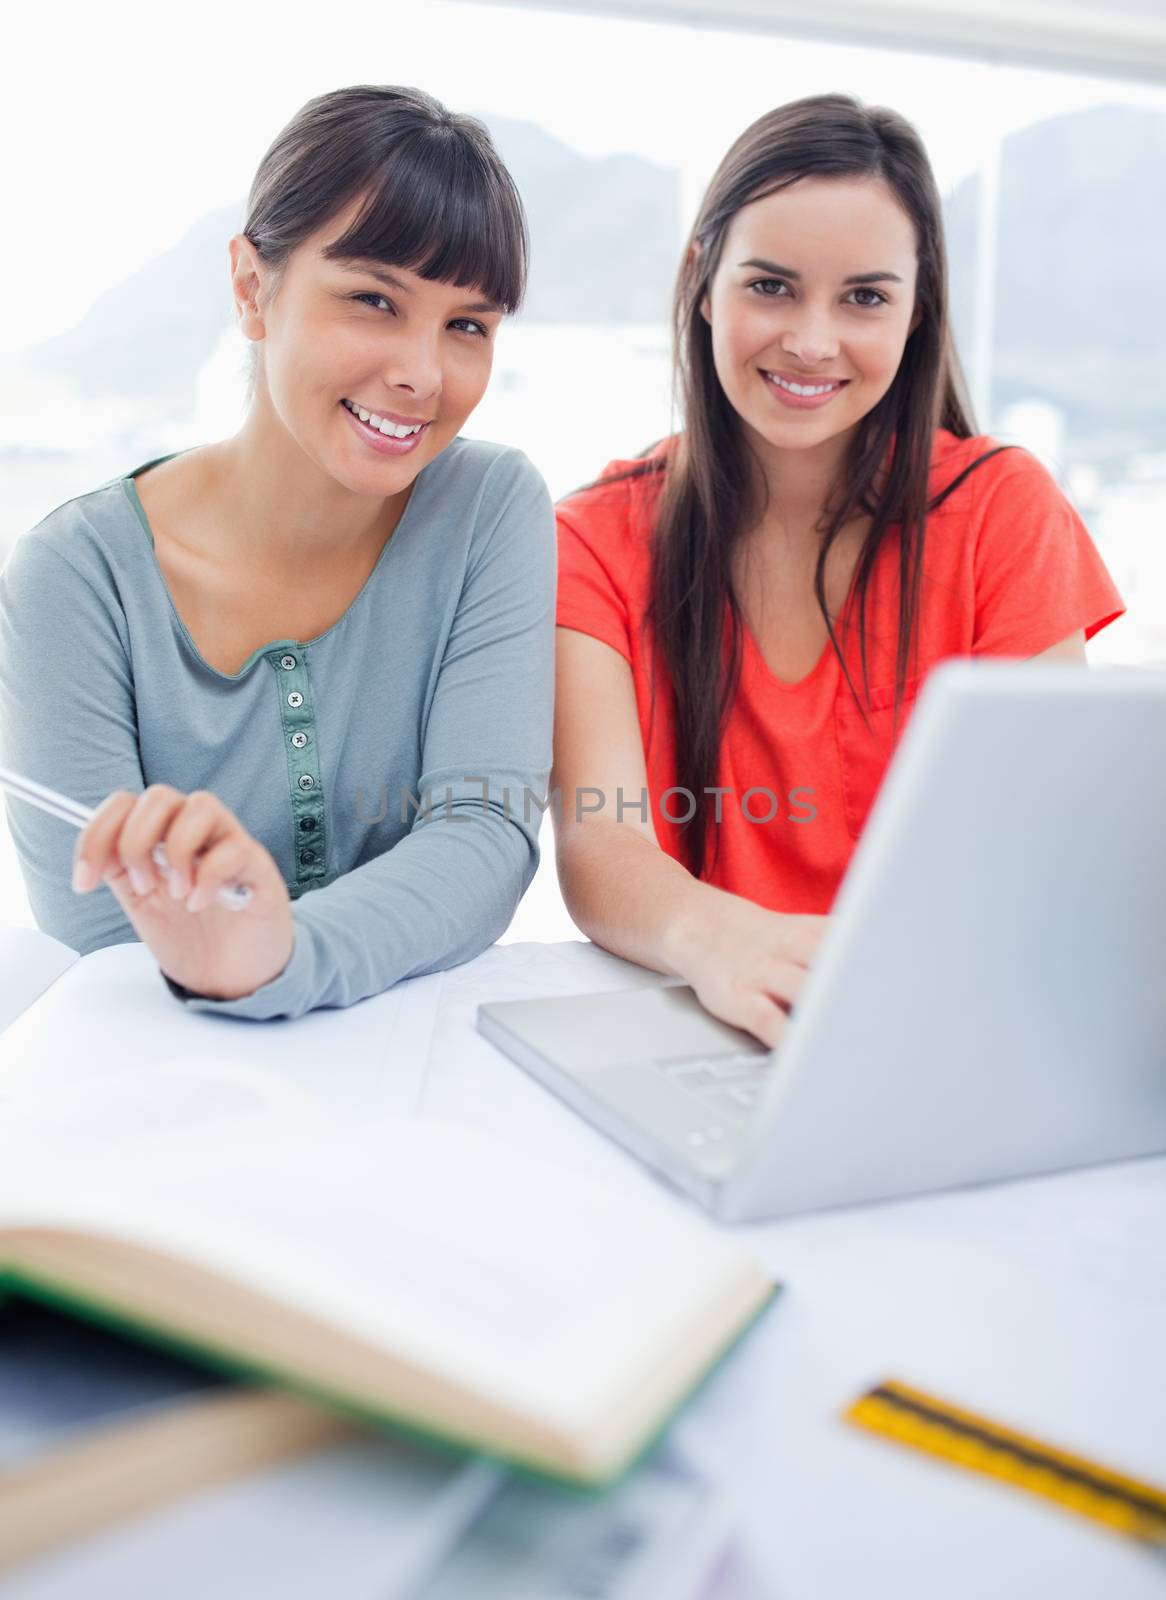 Close up shot of a girl and her friend smiling as they sit with a laptop by Wavebreakmedia